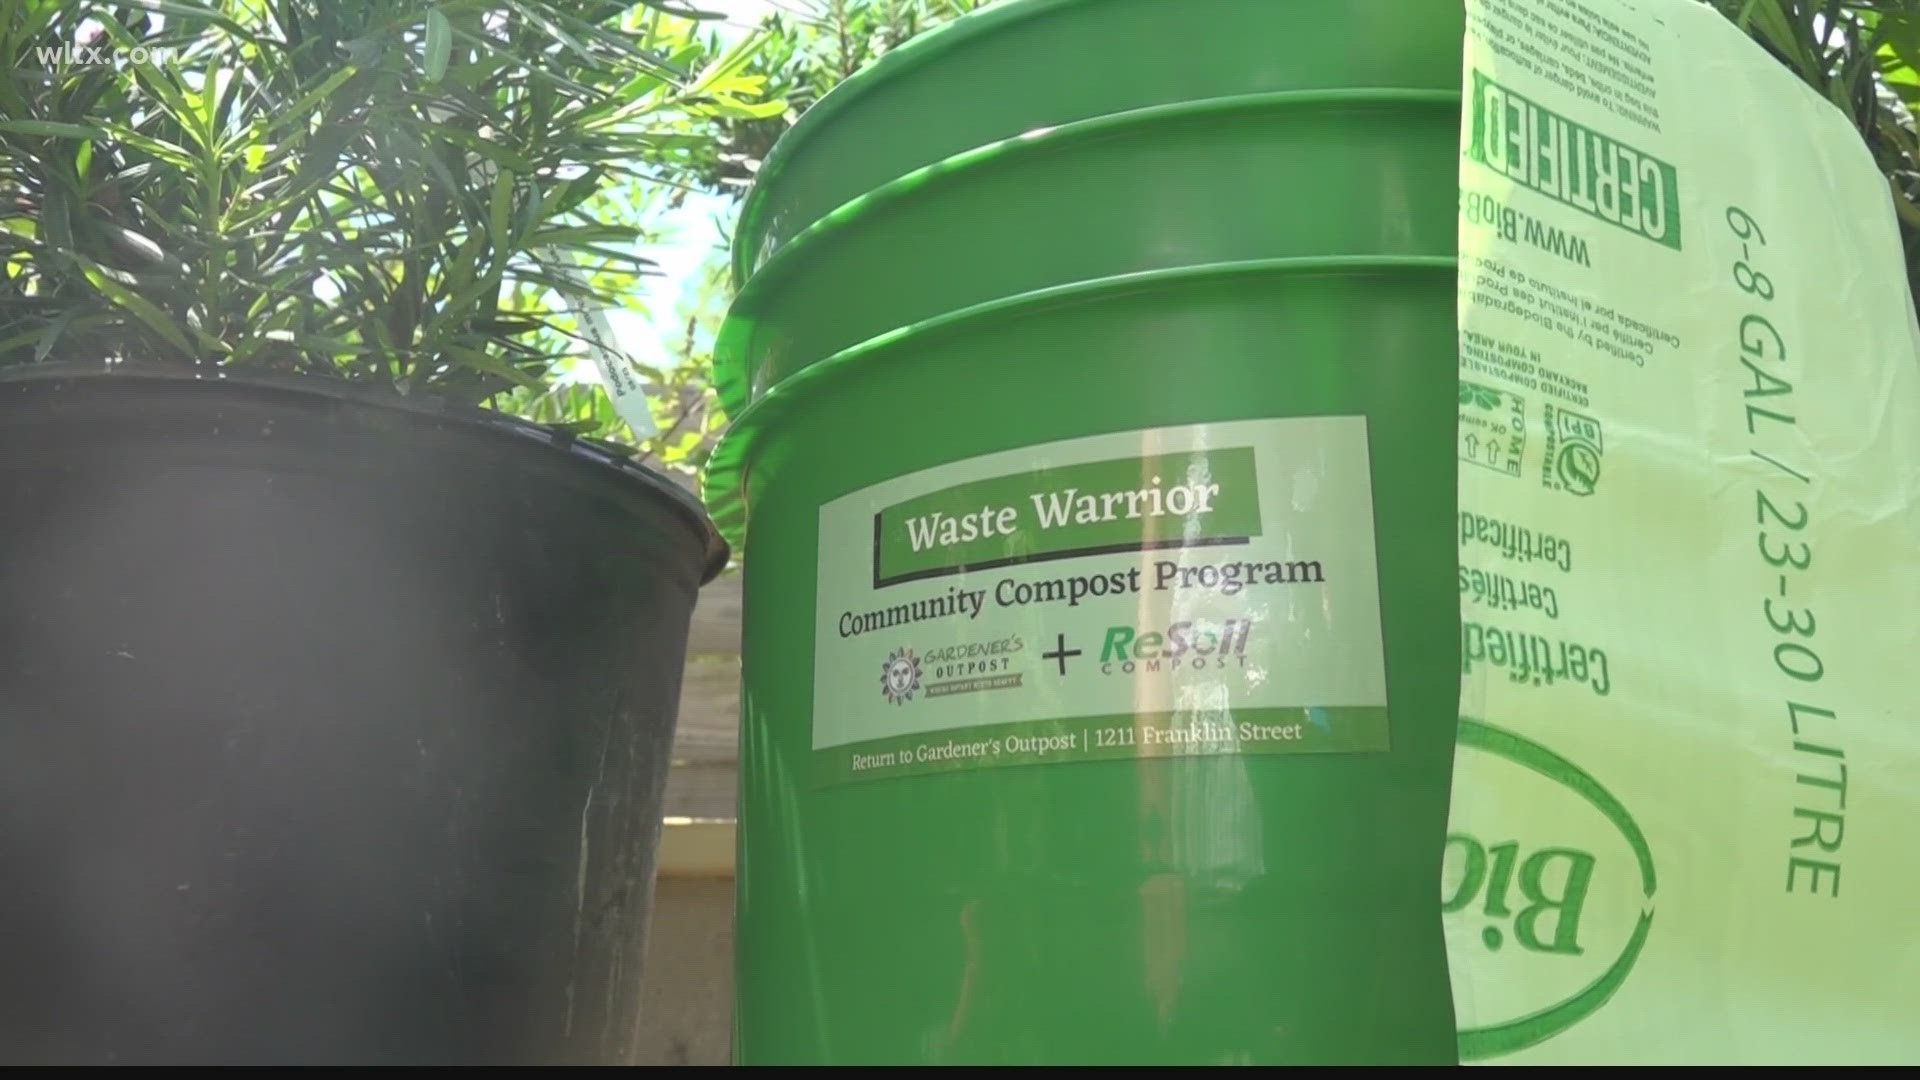 An urban garden center in Columbia is launching a new program to help people compost.